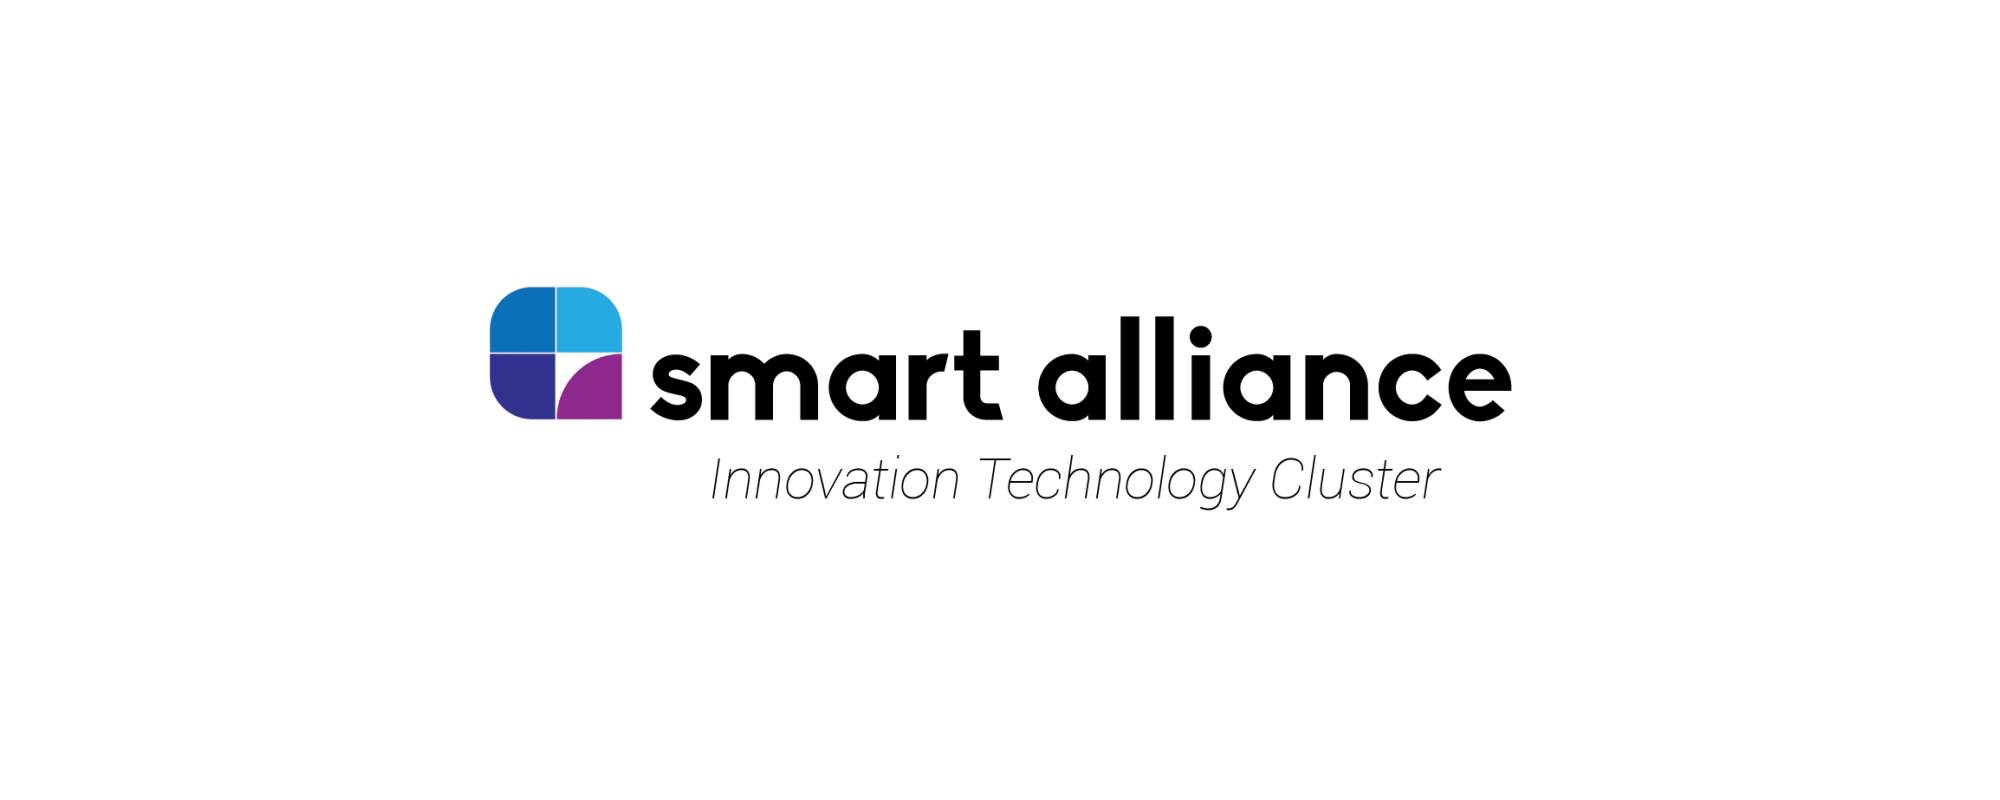 Smart Alliance is included in the European Cluster Panorama 2021